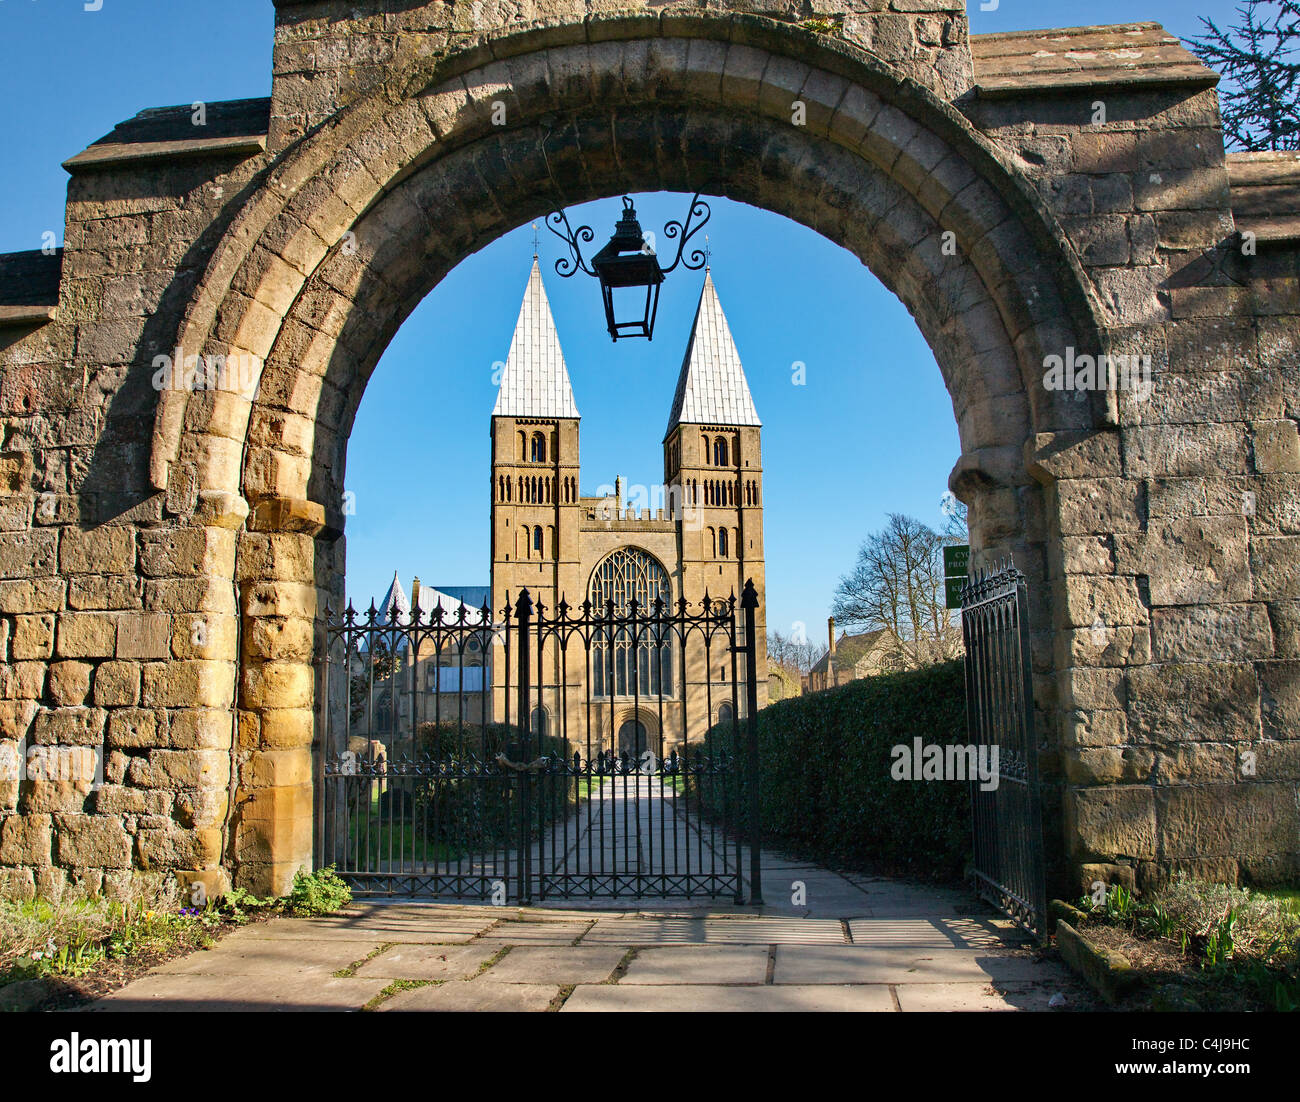 Southwell Minster in Nottinghamshire with unusual pepper pot towers viewed through the romanesque entrance gateway Stock Photo